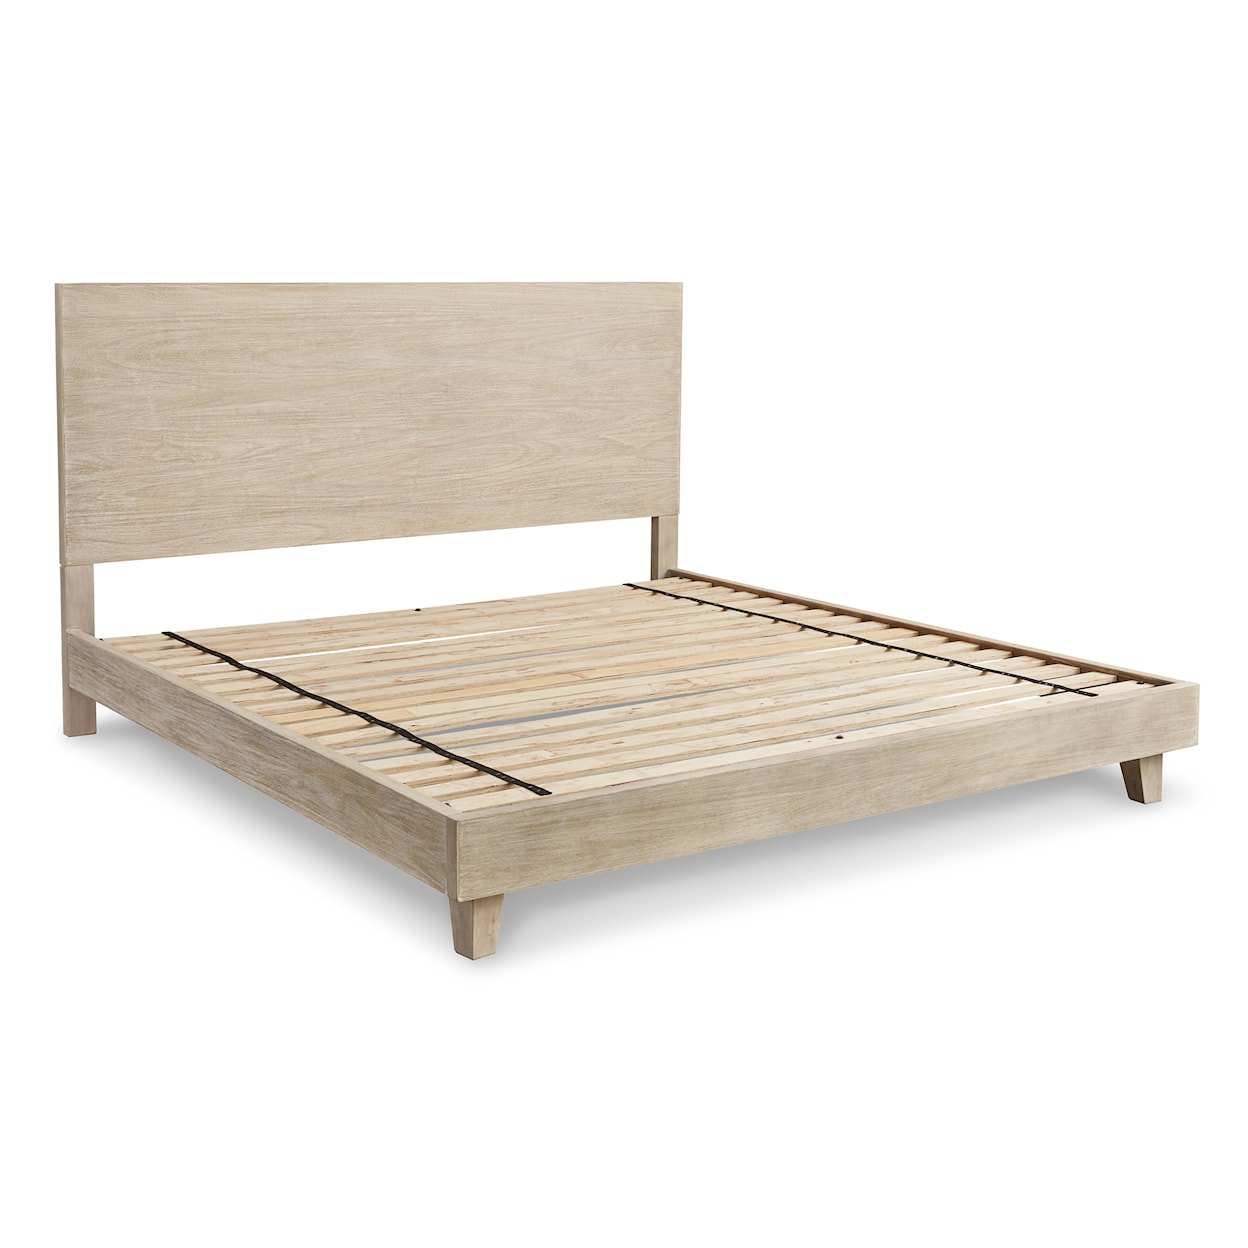 Benchcraft Michelia King Panel Bed